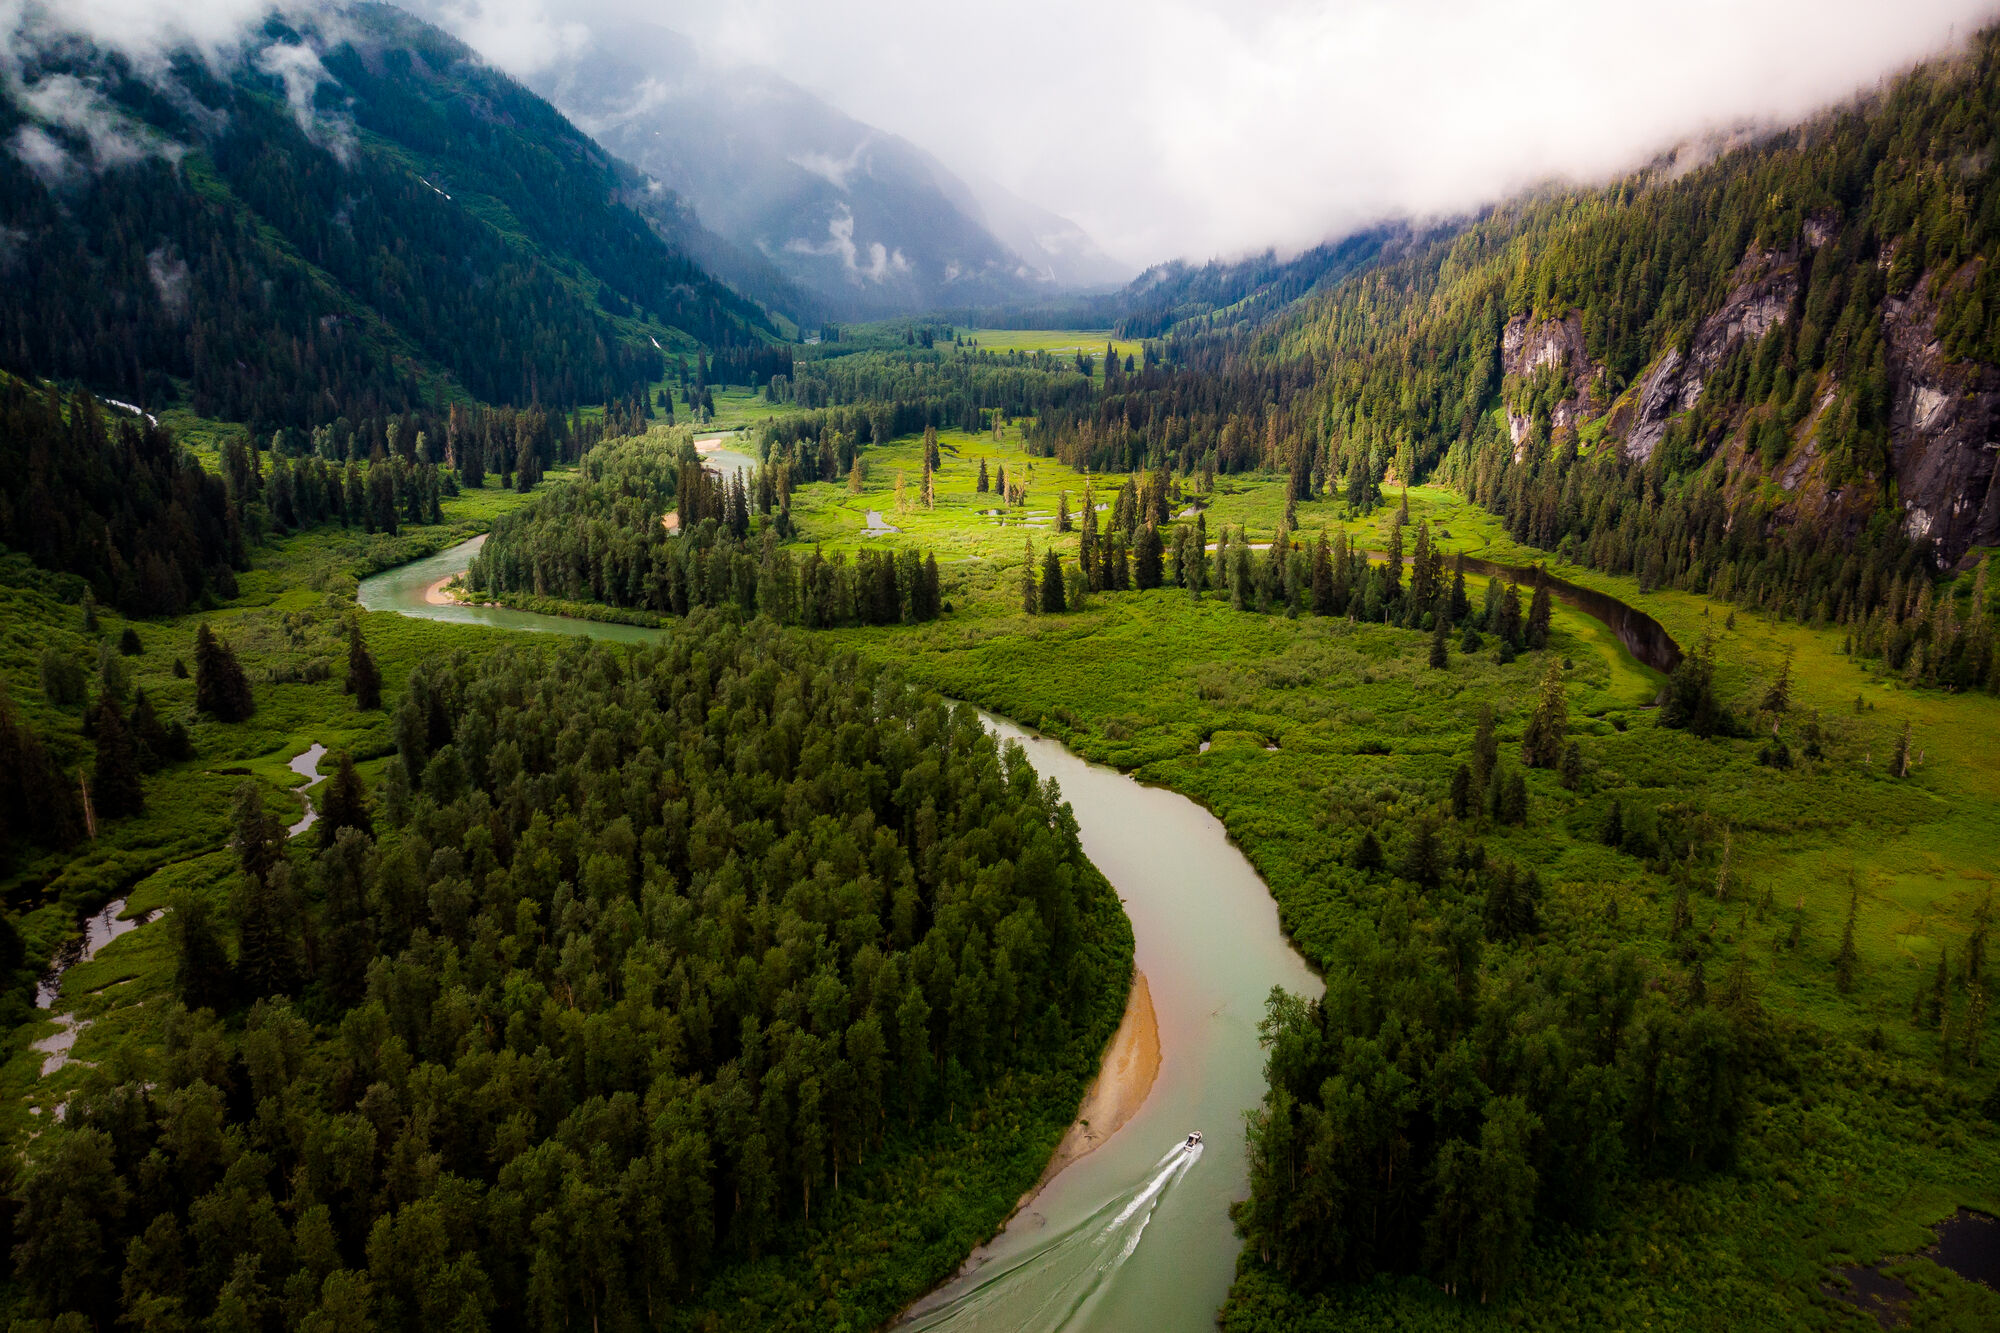 A river runs through a verdant green valley with misty mountains in the distance